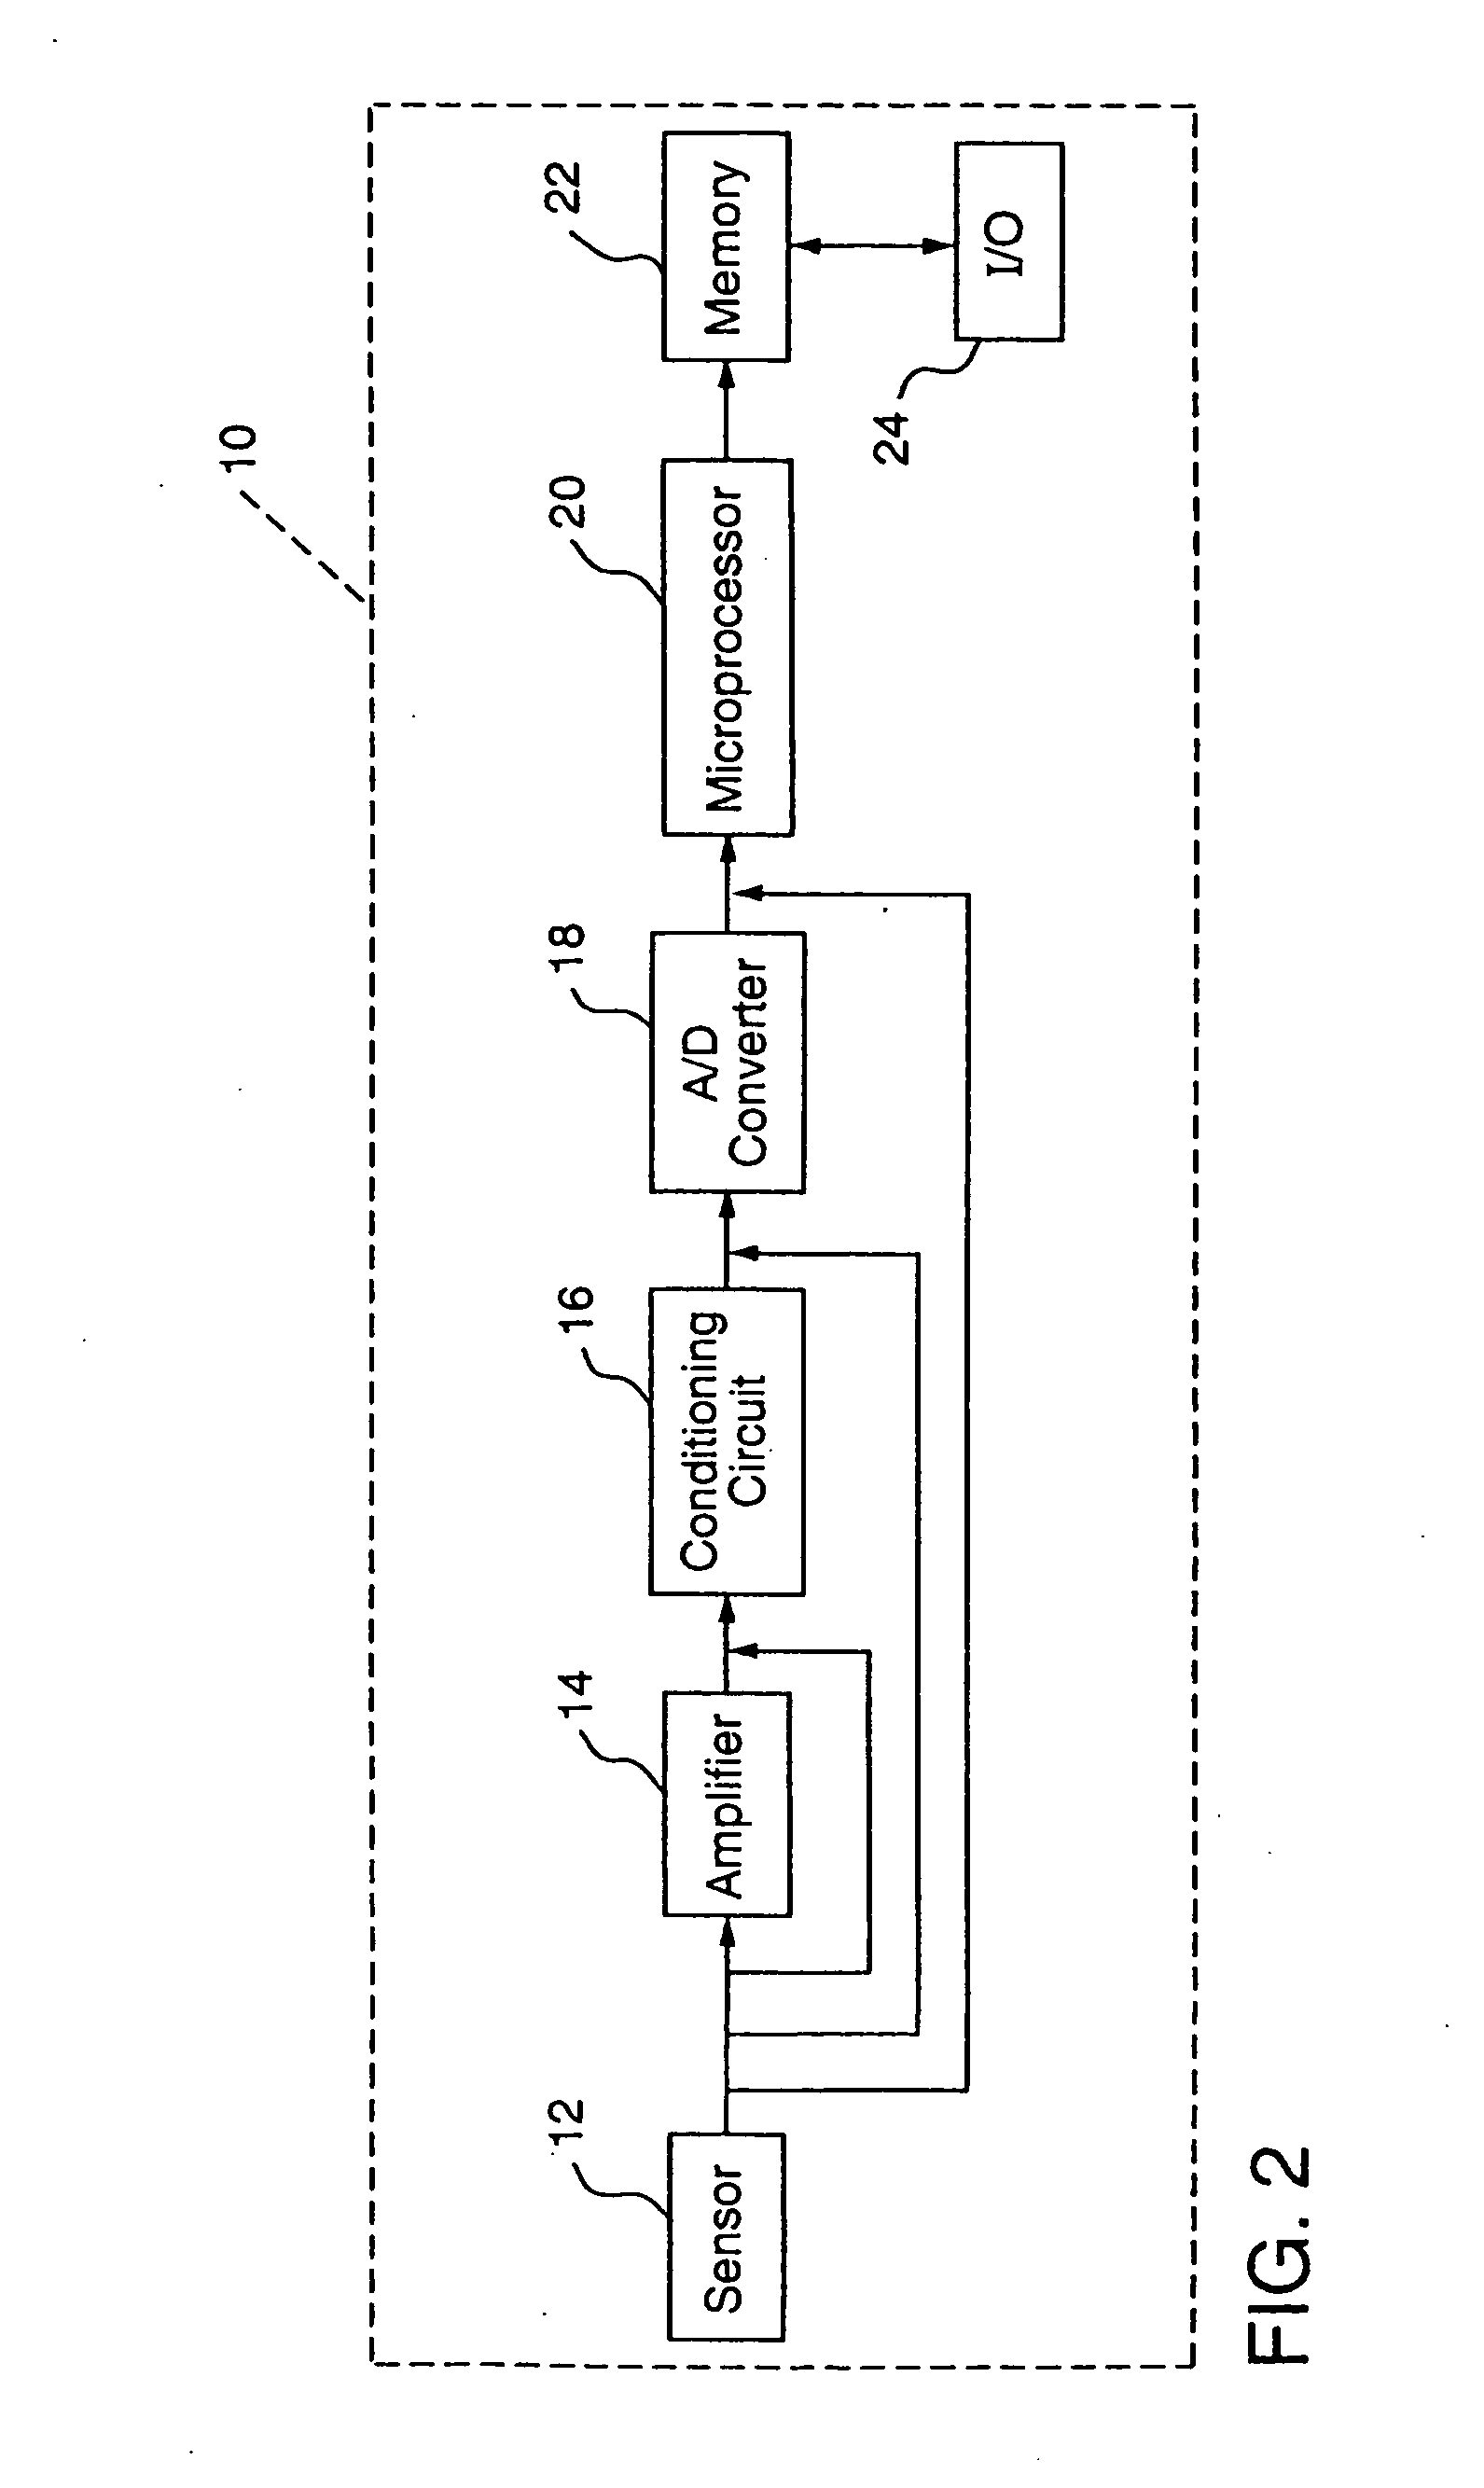 Apparatus for detecting human physiological and contextual information